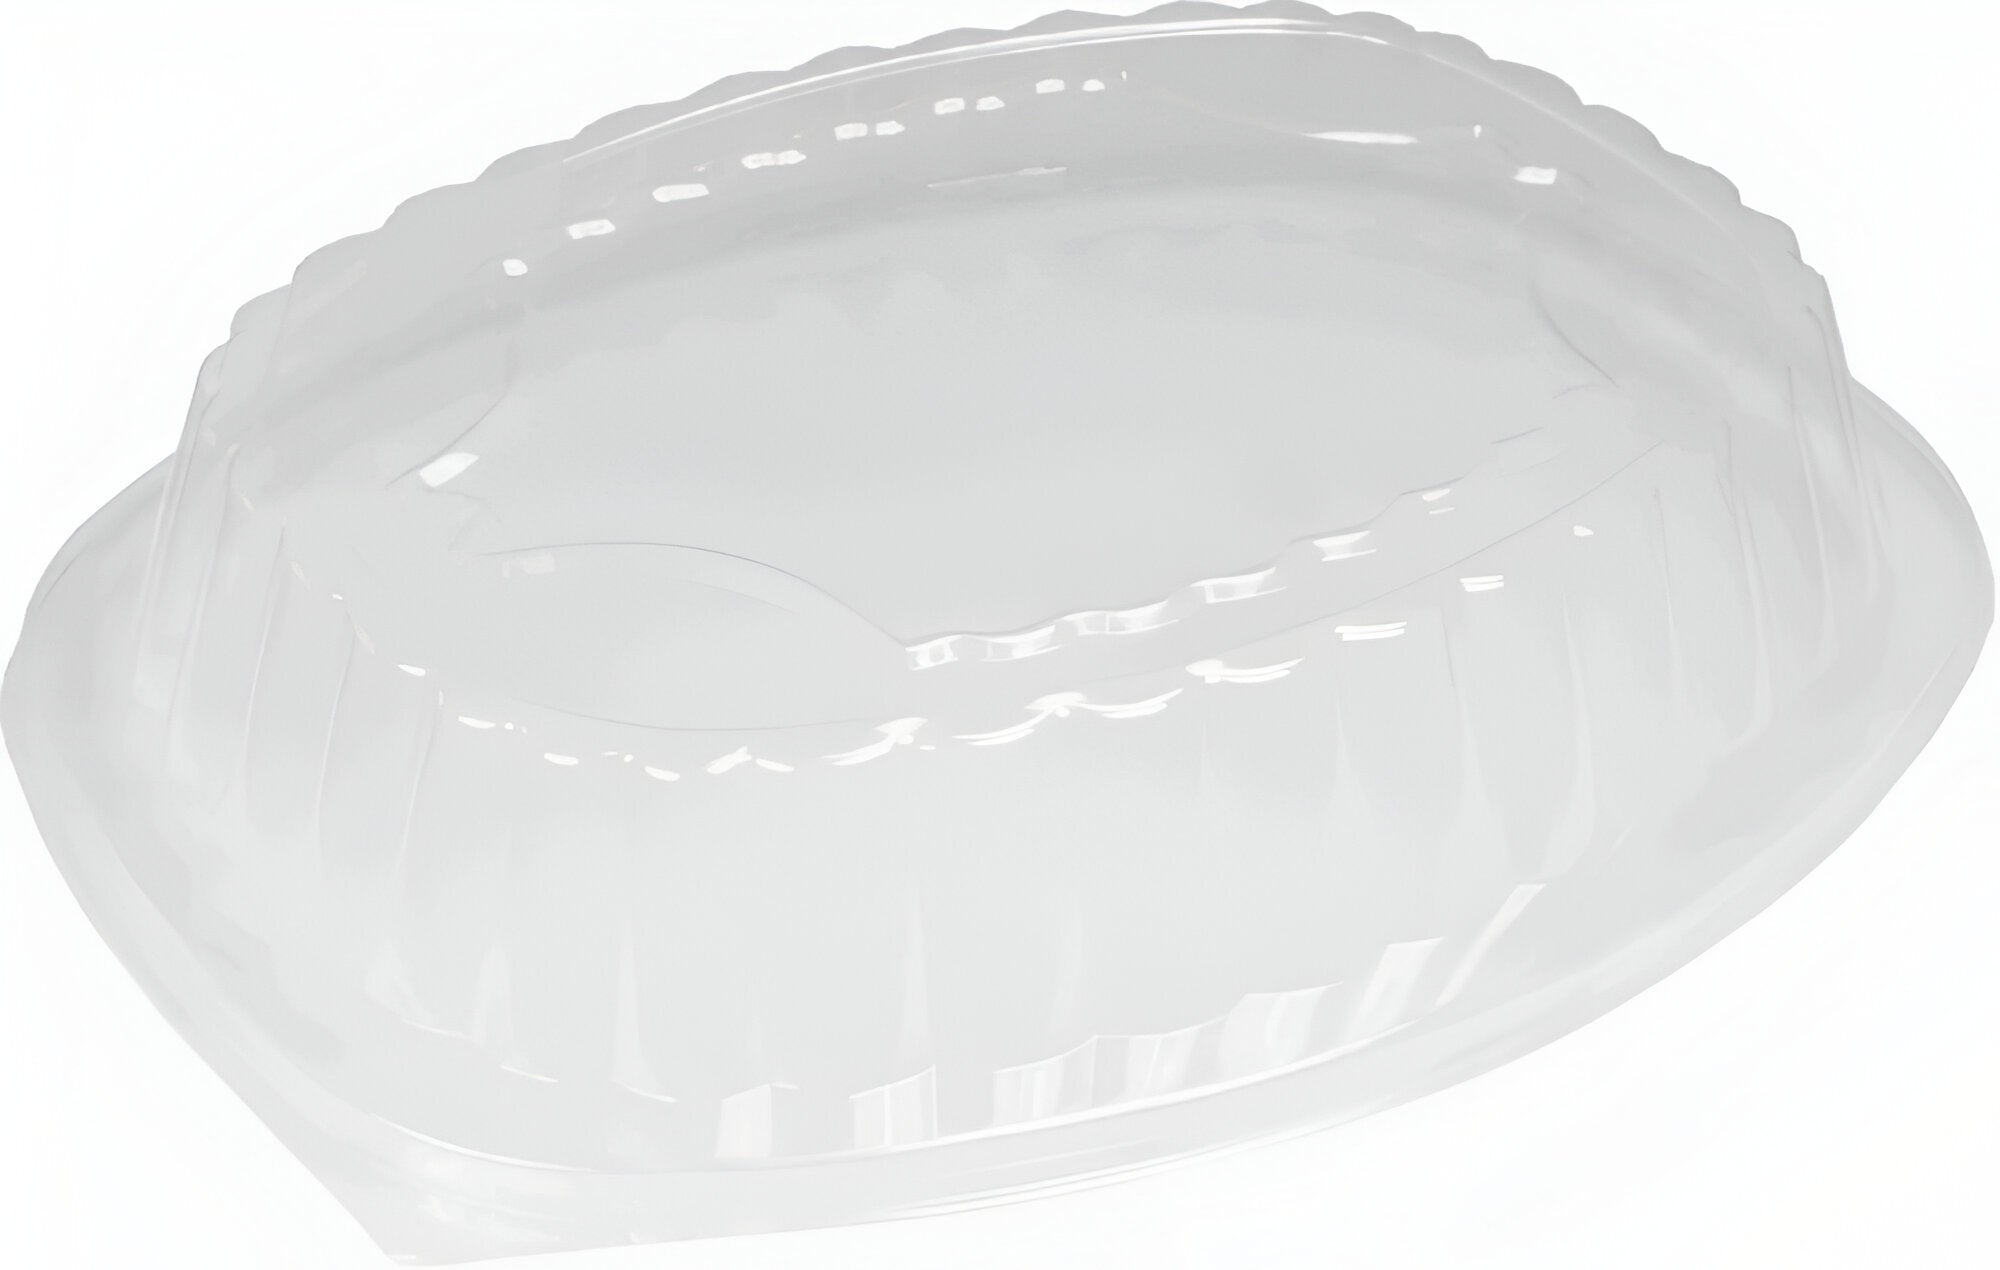 HFA - Plastic Dome Lid For 323, 324 Foil Containers, 100/Cs - 324DL